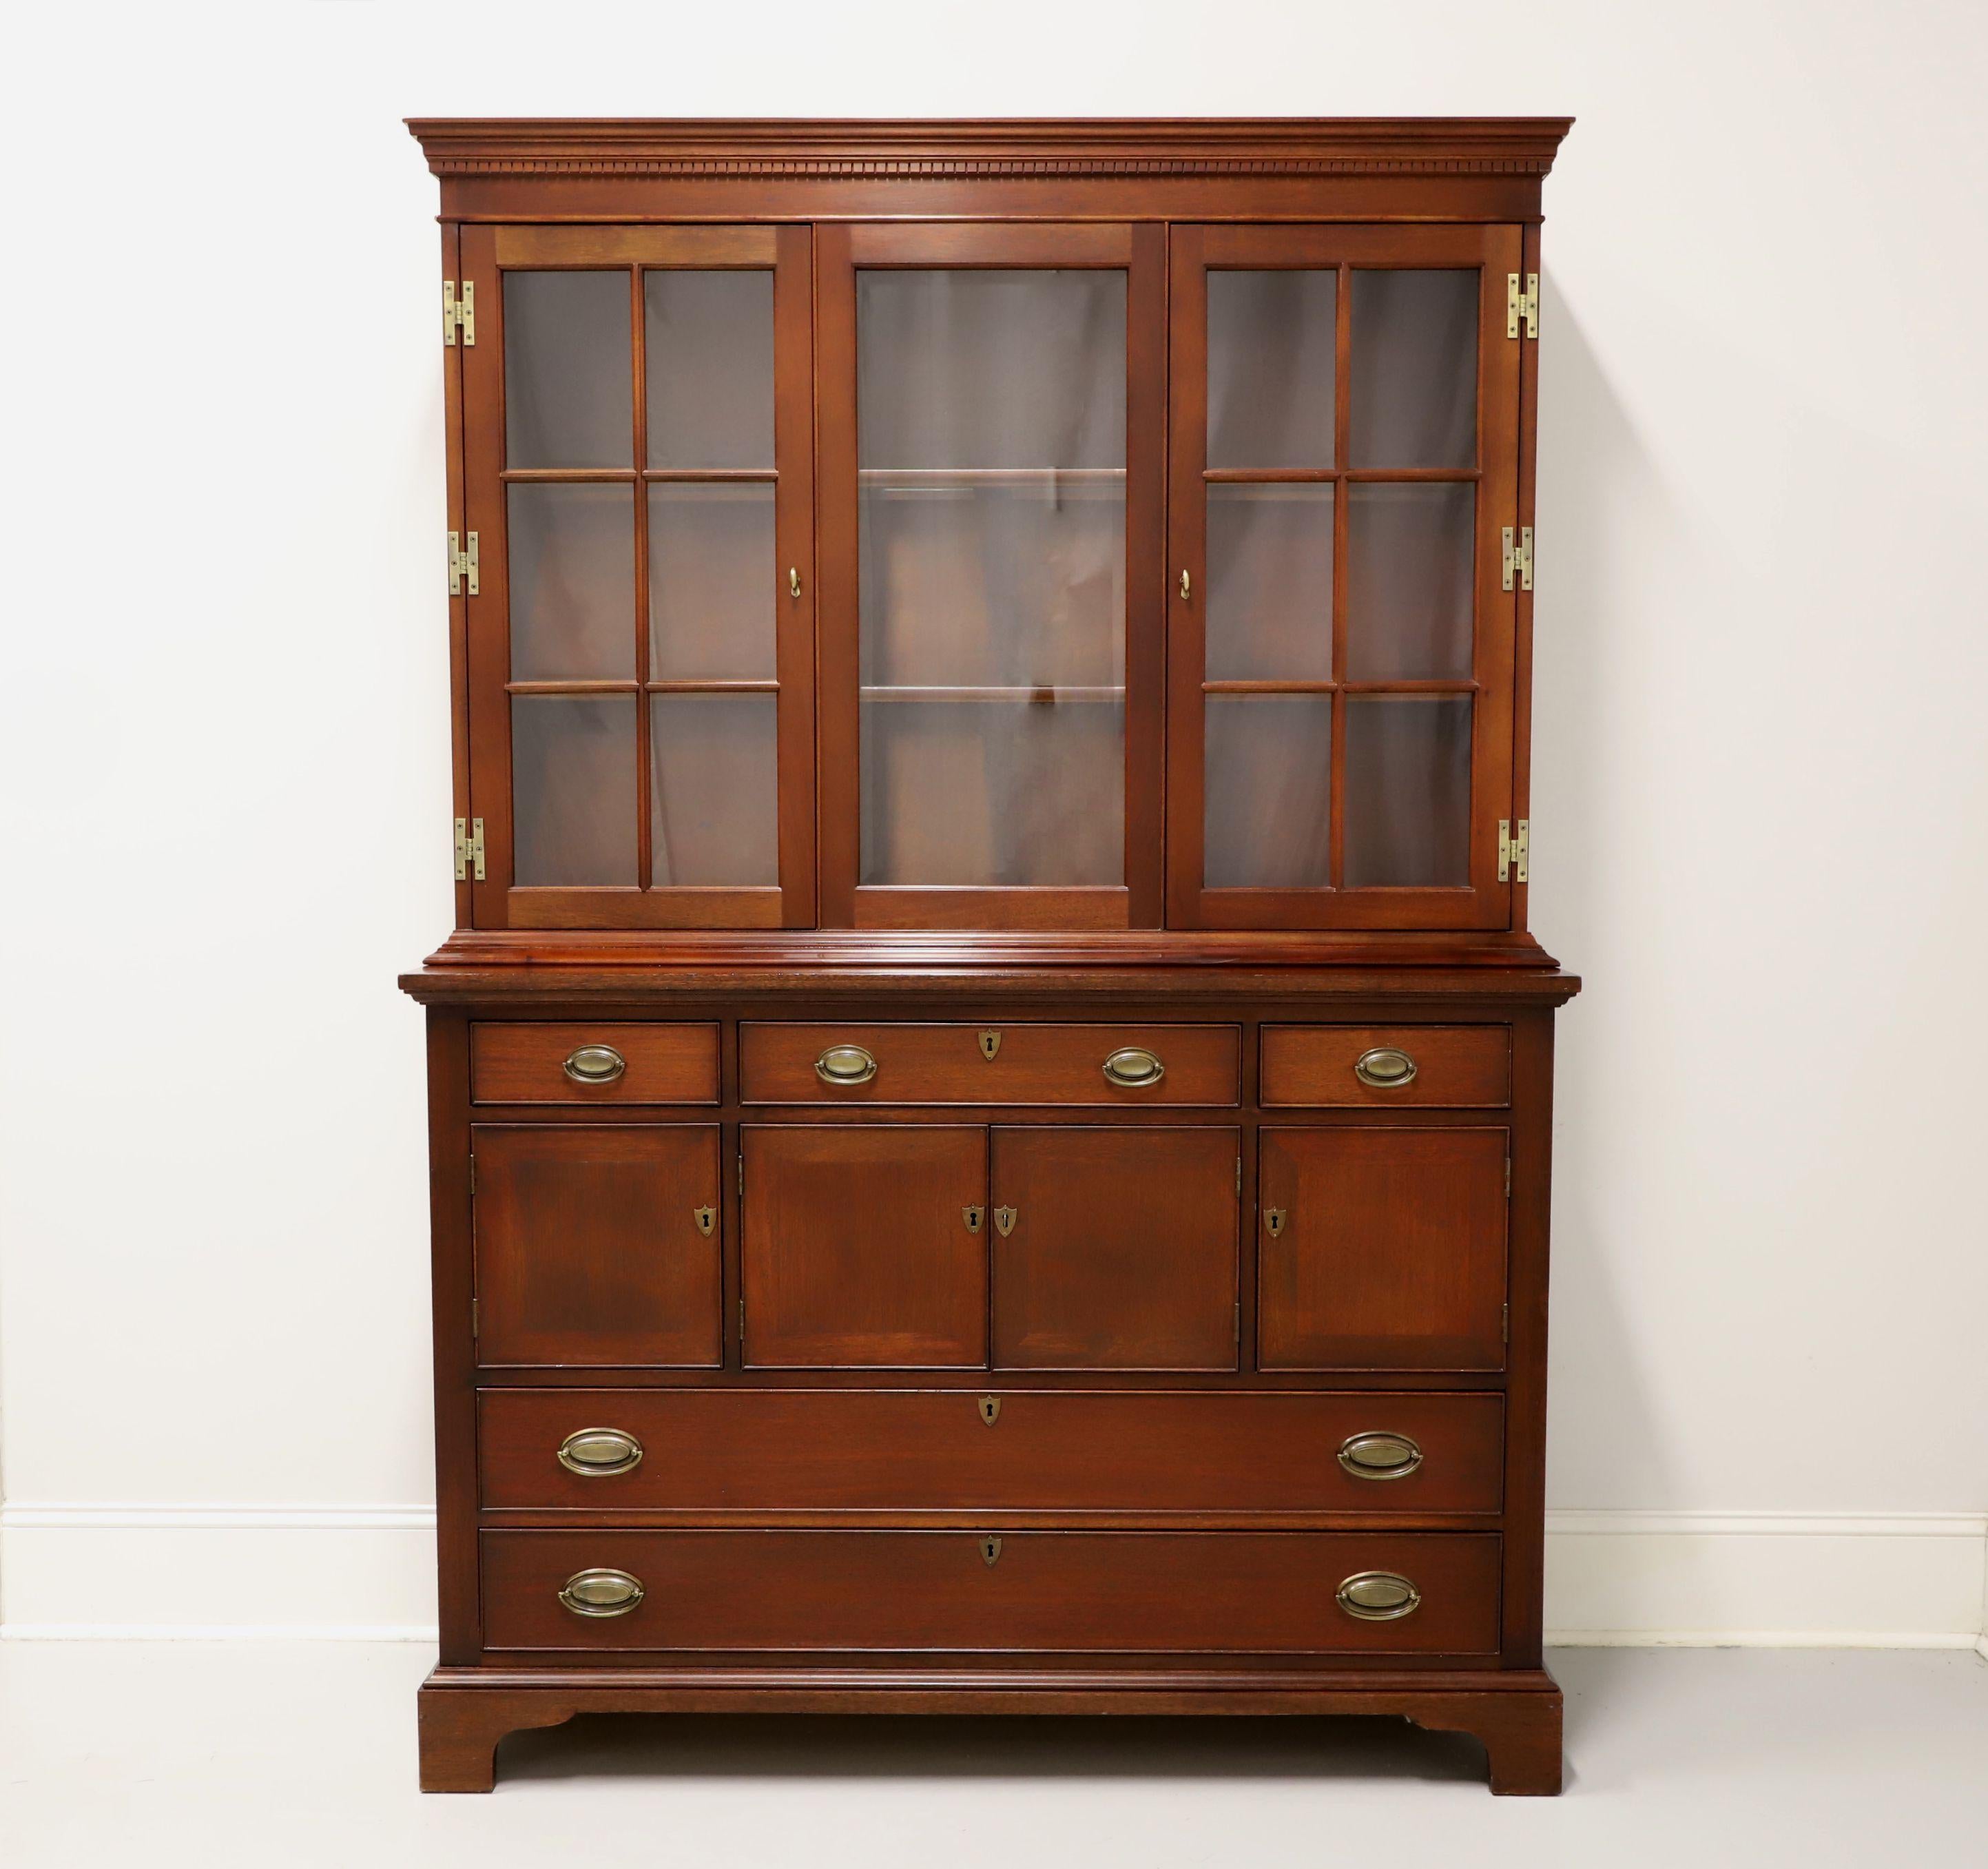 A Georgian style china cabinet hutch by high-quality furniture maker Craftique. Solid mahogany with their English Mahogany finish, brass hardware, crown molding, and bracket feet. Upper cabinet features two fixed plate-grooved wood shelves with four